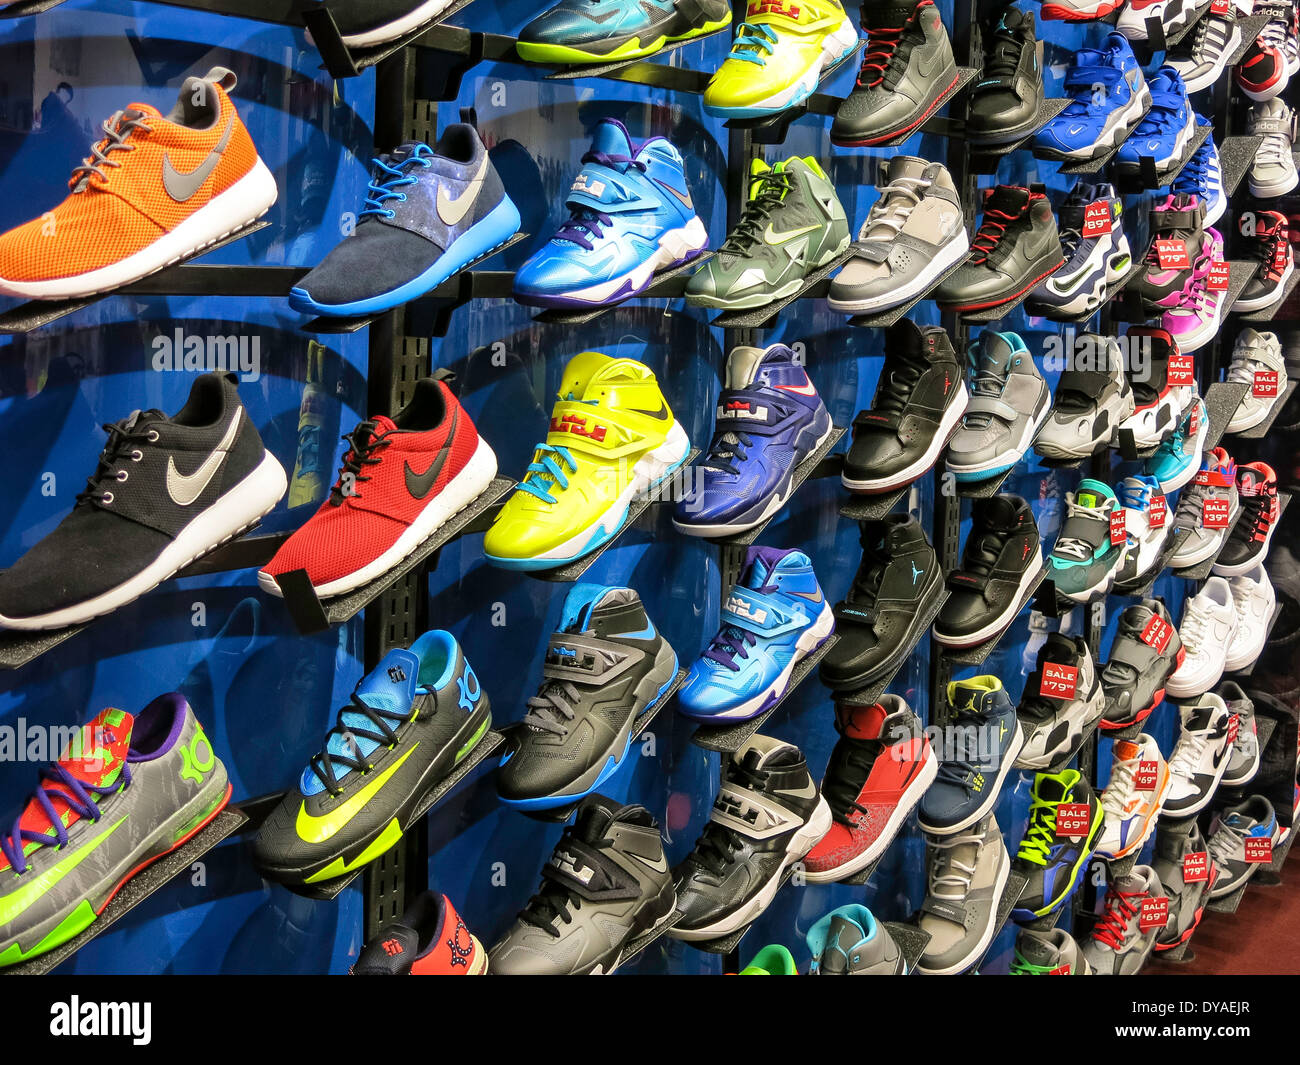 Shoe Brands High Resolution Stock Photography and Images - Alamy